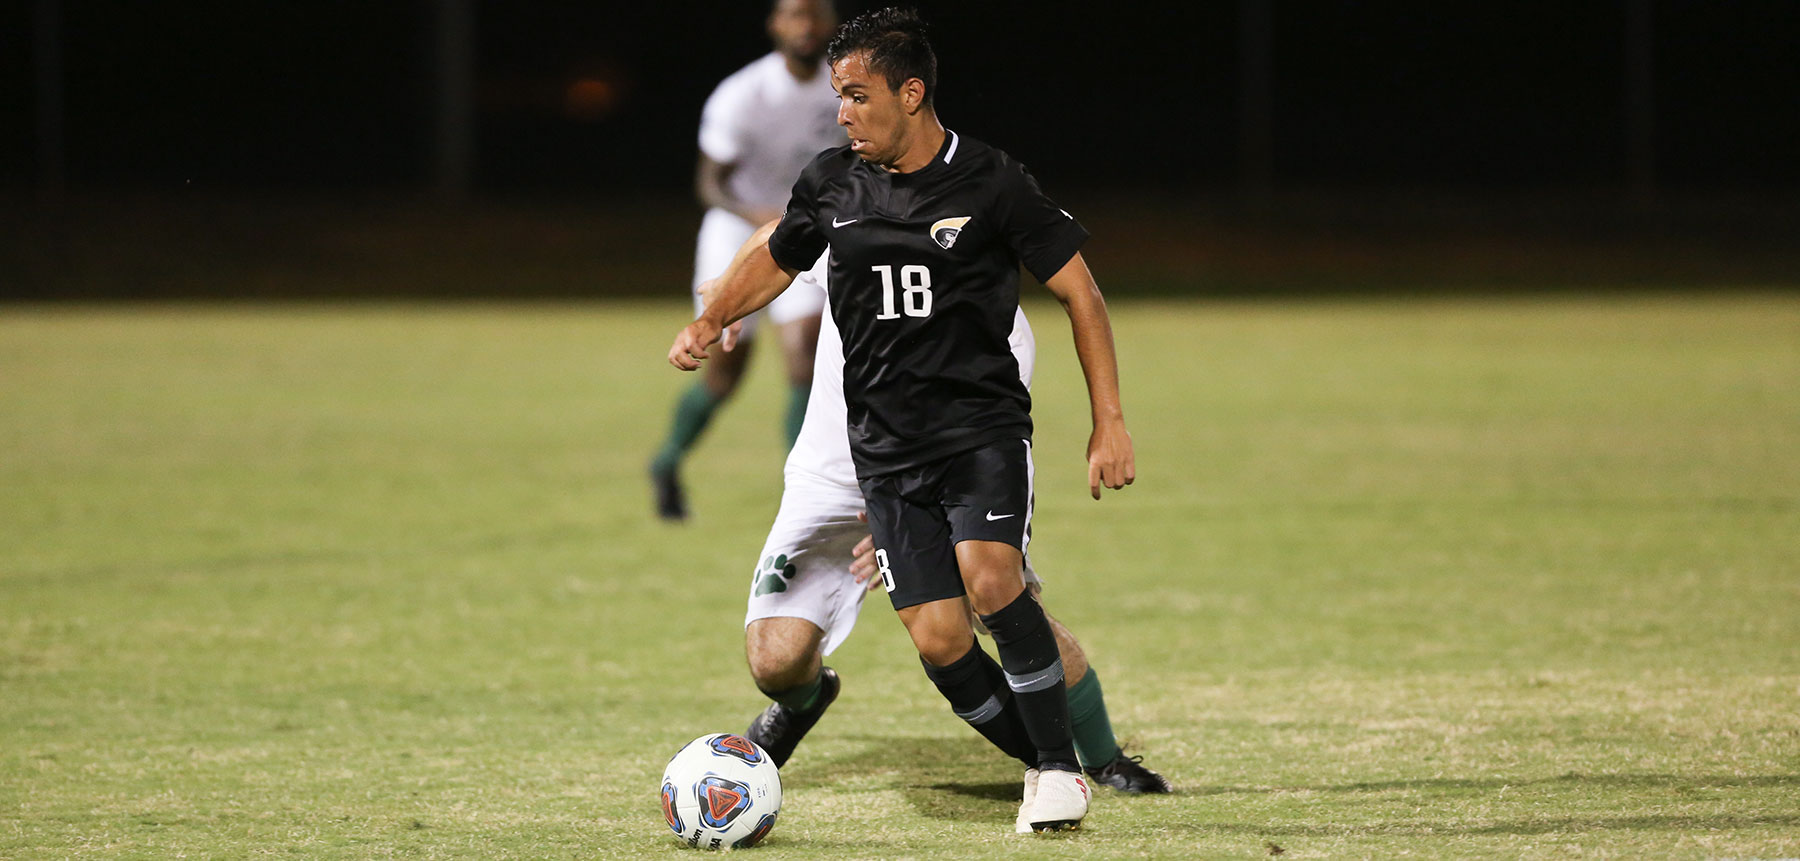 Trojans Battle Back to Force Extra Play with Carson-Newman; 1-1(2OT)